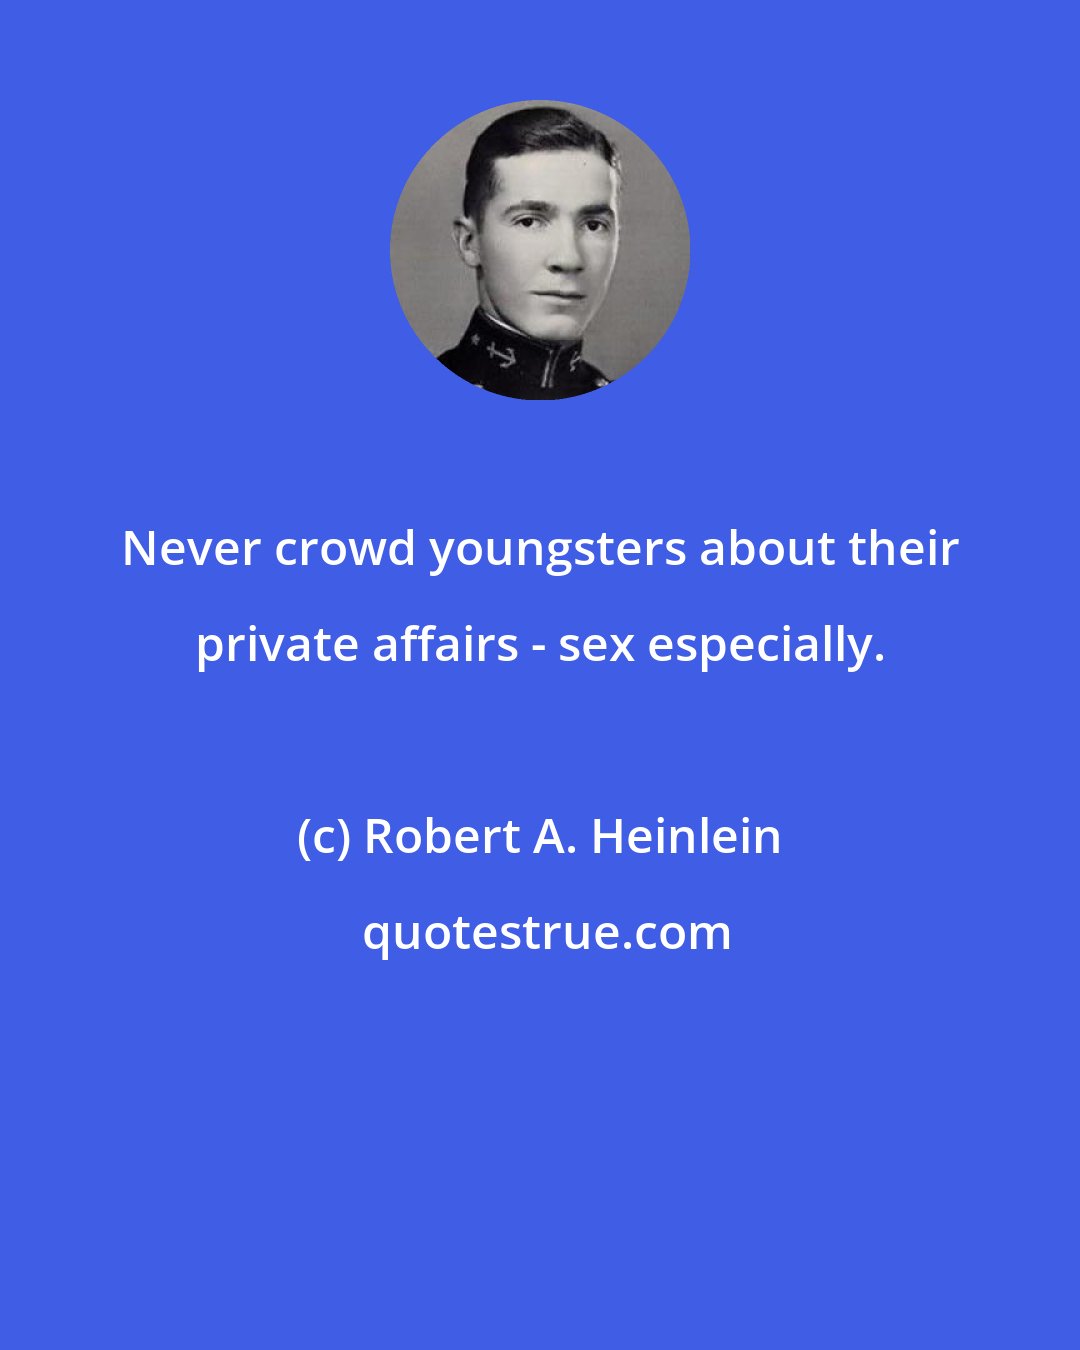 Robert A. Heinlein: Never crowd youngsters about their private affairs - sex especially.